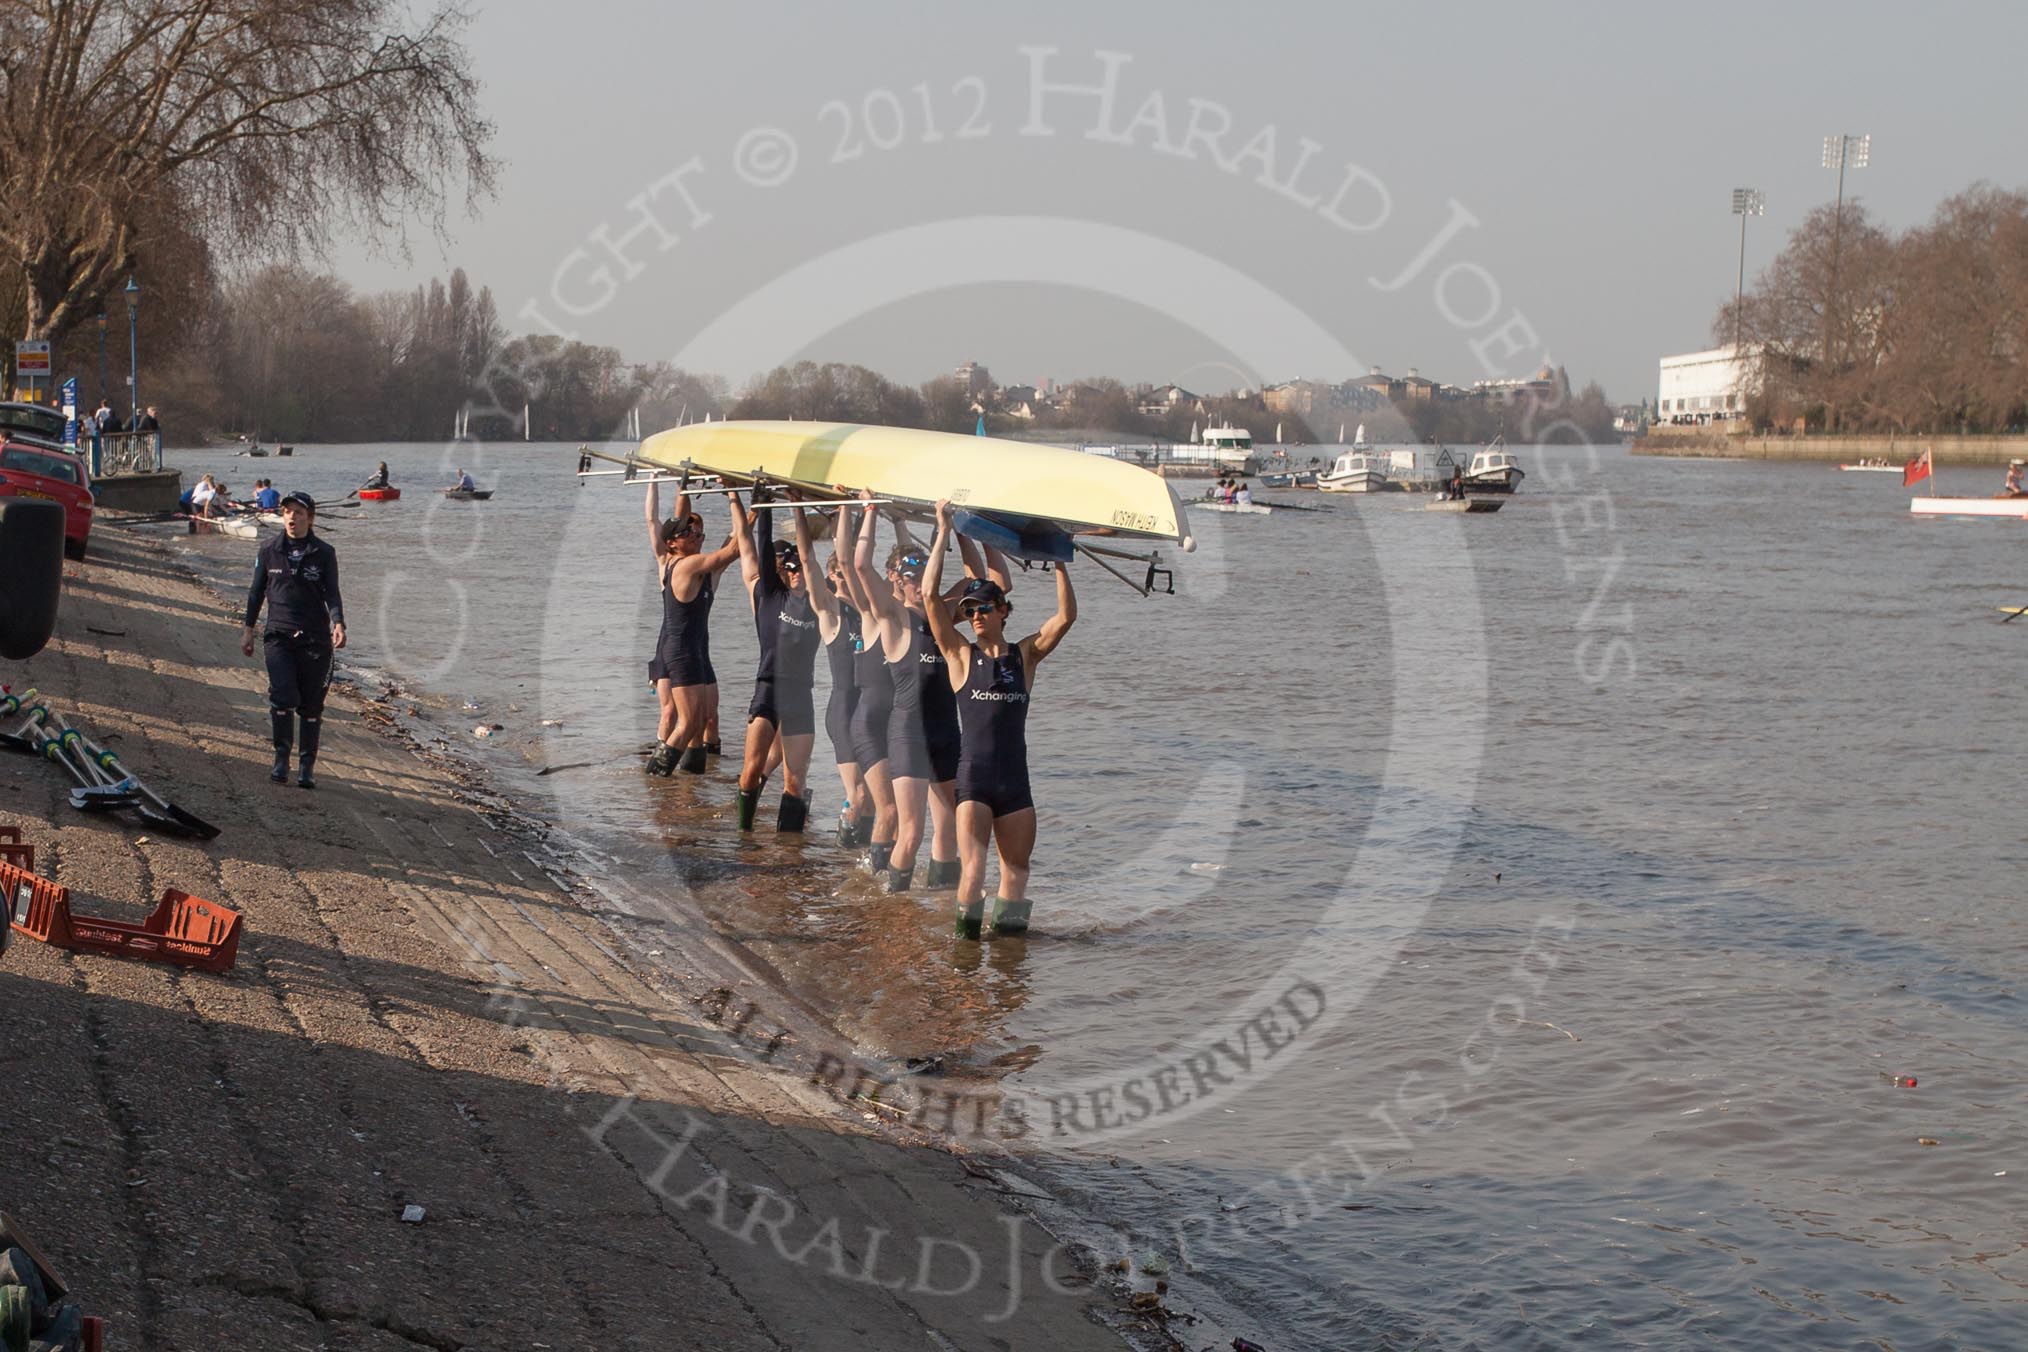 The Boat Race season 2012 - fixture OUBC vs Leander: The OUBC Isis squad returning from their fixture against Tideway Scullers. On the left cox Katherine Apfelbaum, carrying the boat are Tom Hilton, Chris Fairweather, Julian Bubb-Humfryes, Ben Snodin, Joe Dawson, Geordie Macleod, Justin Webb, and Tom Watson..




on 24 March 2012 at 14:58, image #153